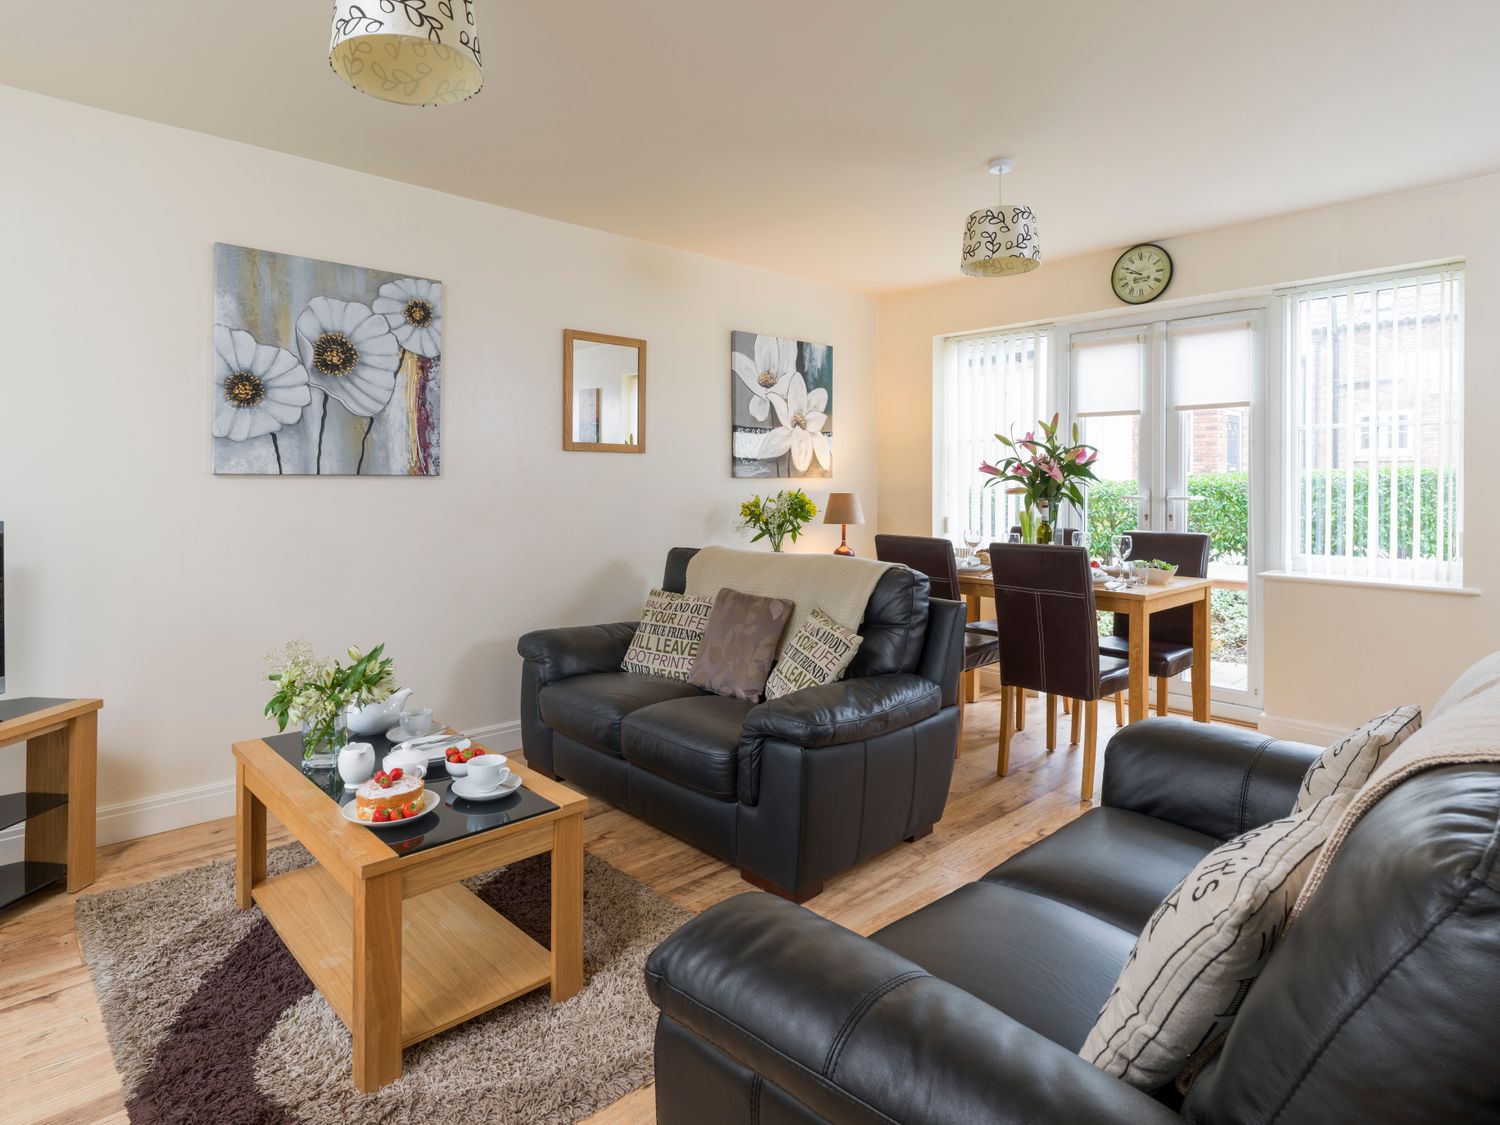 Sunny Corner Cottage - North Yorkshire (incl. Whitby) - 1015768 - photo 1